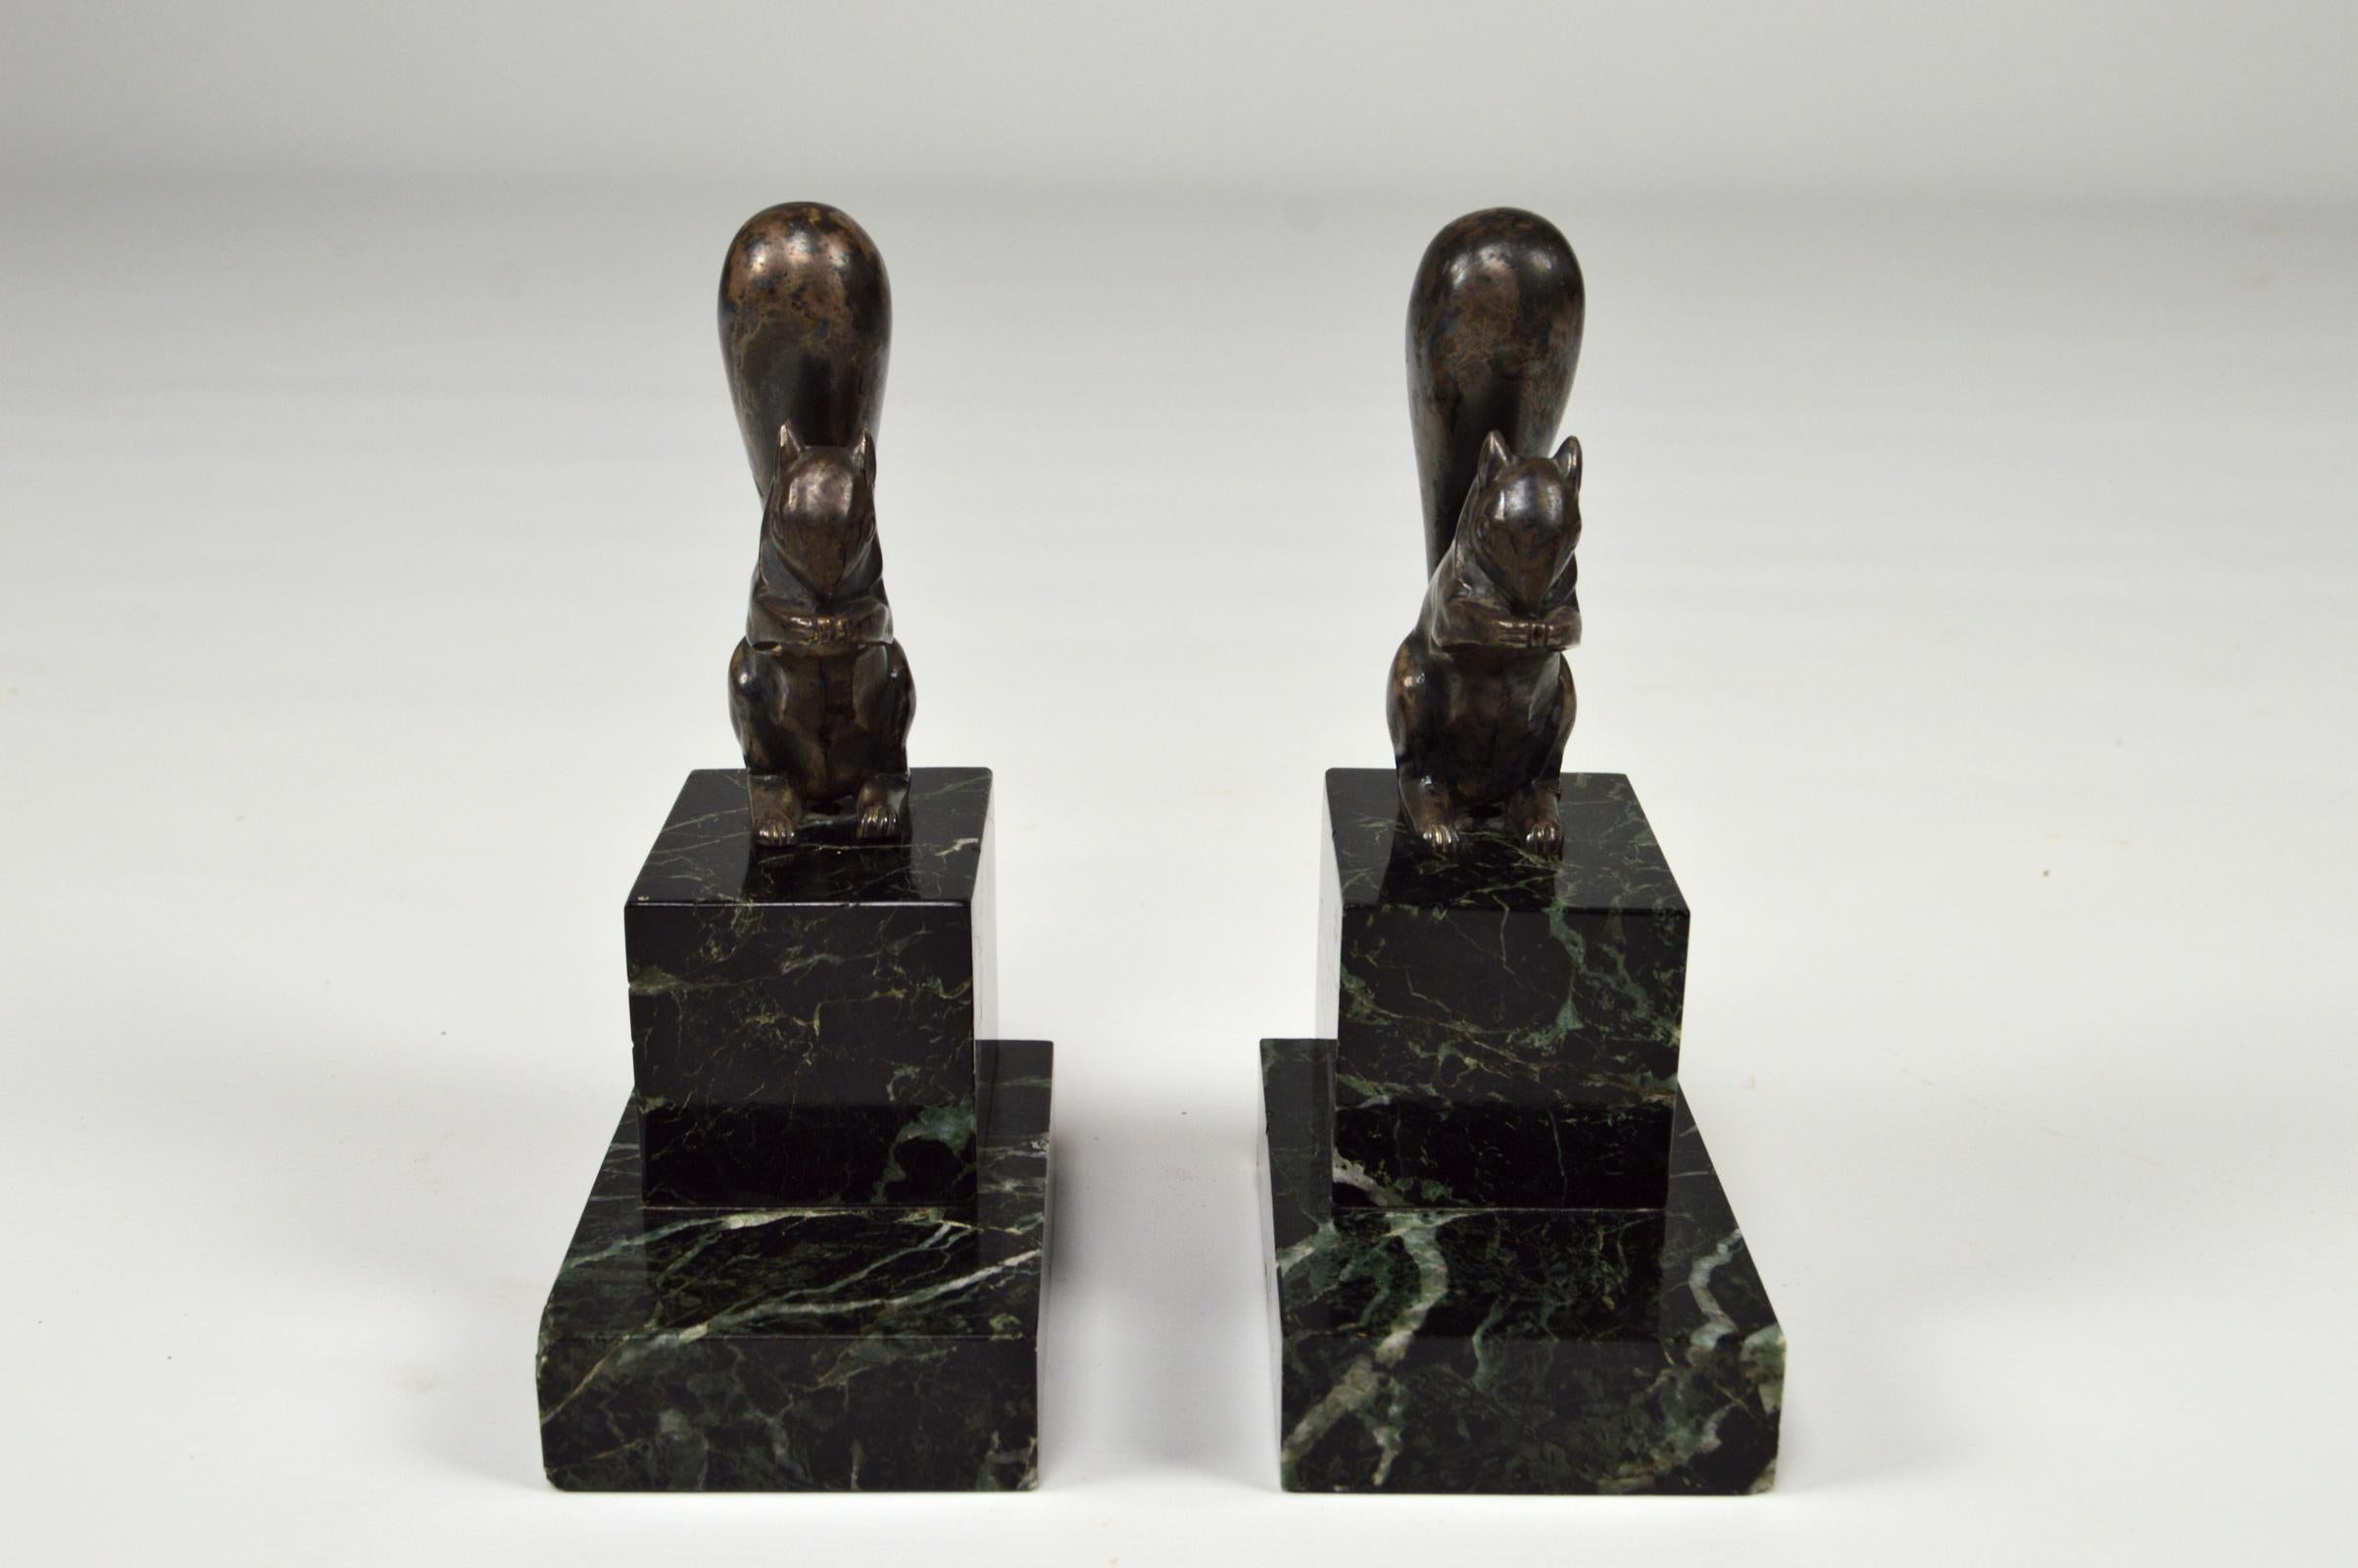 Silvered Art Deco Squirrels Bookends, Bronze, Marcel Guillemard, France, circa 1930 For Sale